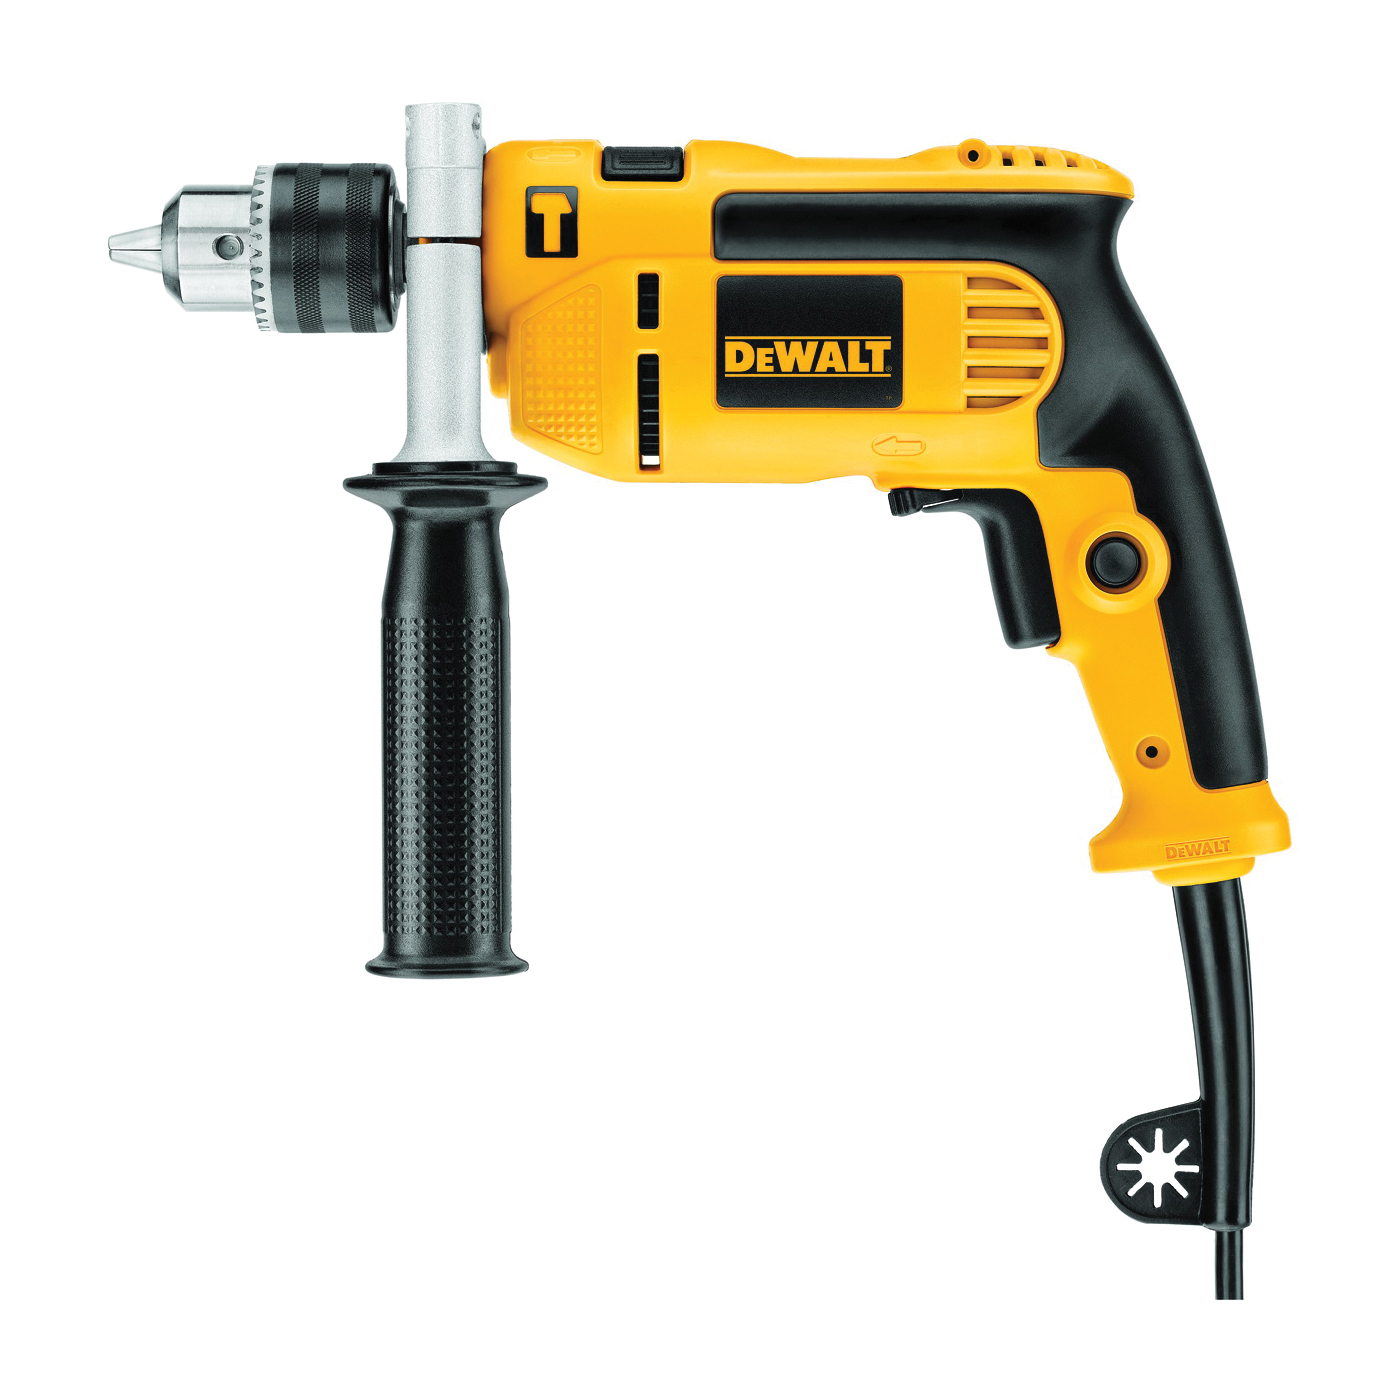 DWE5010 Hammer Drill, 7 A, Keyed Chuck, 1/2 in Chuck, 0 to 2800 rpm Speed